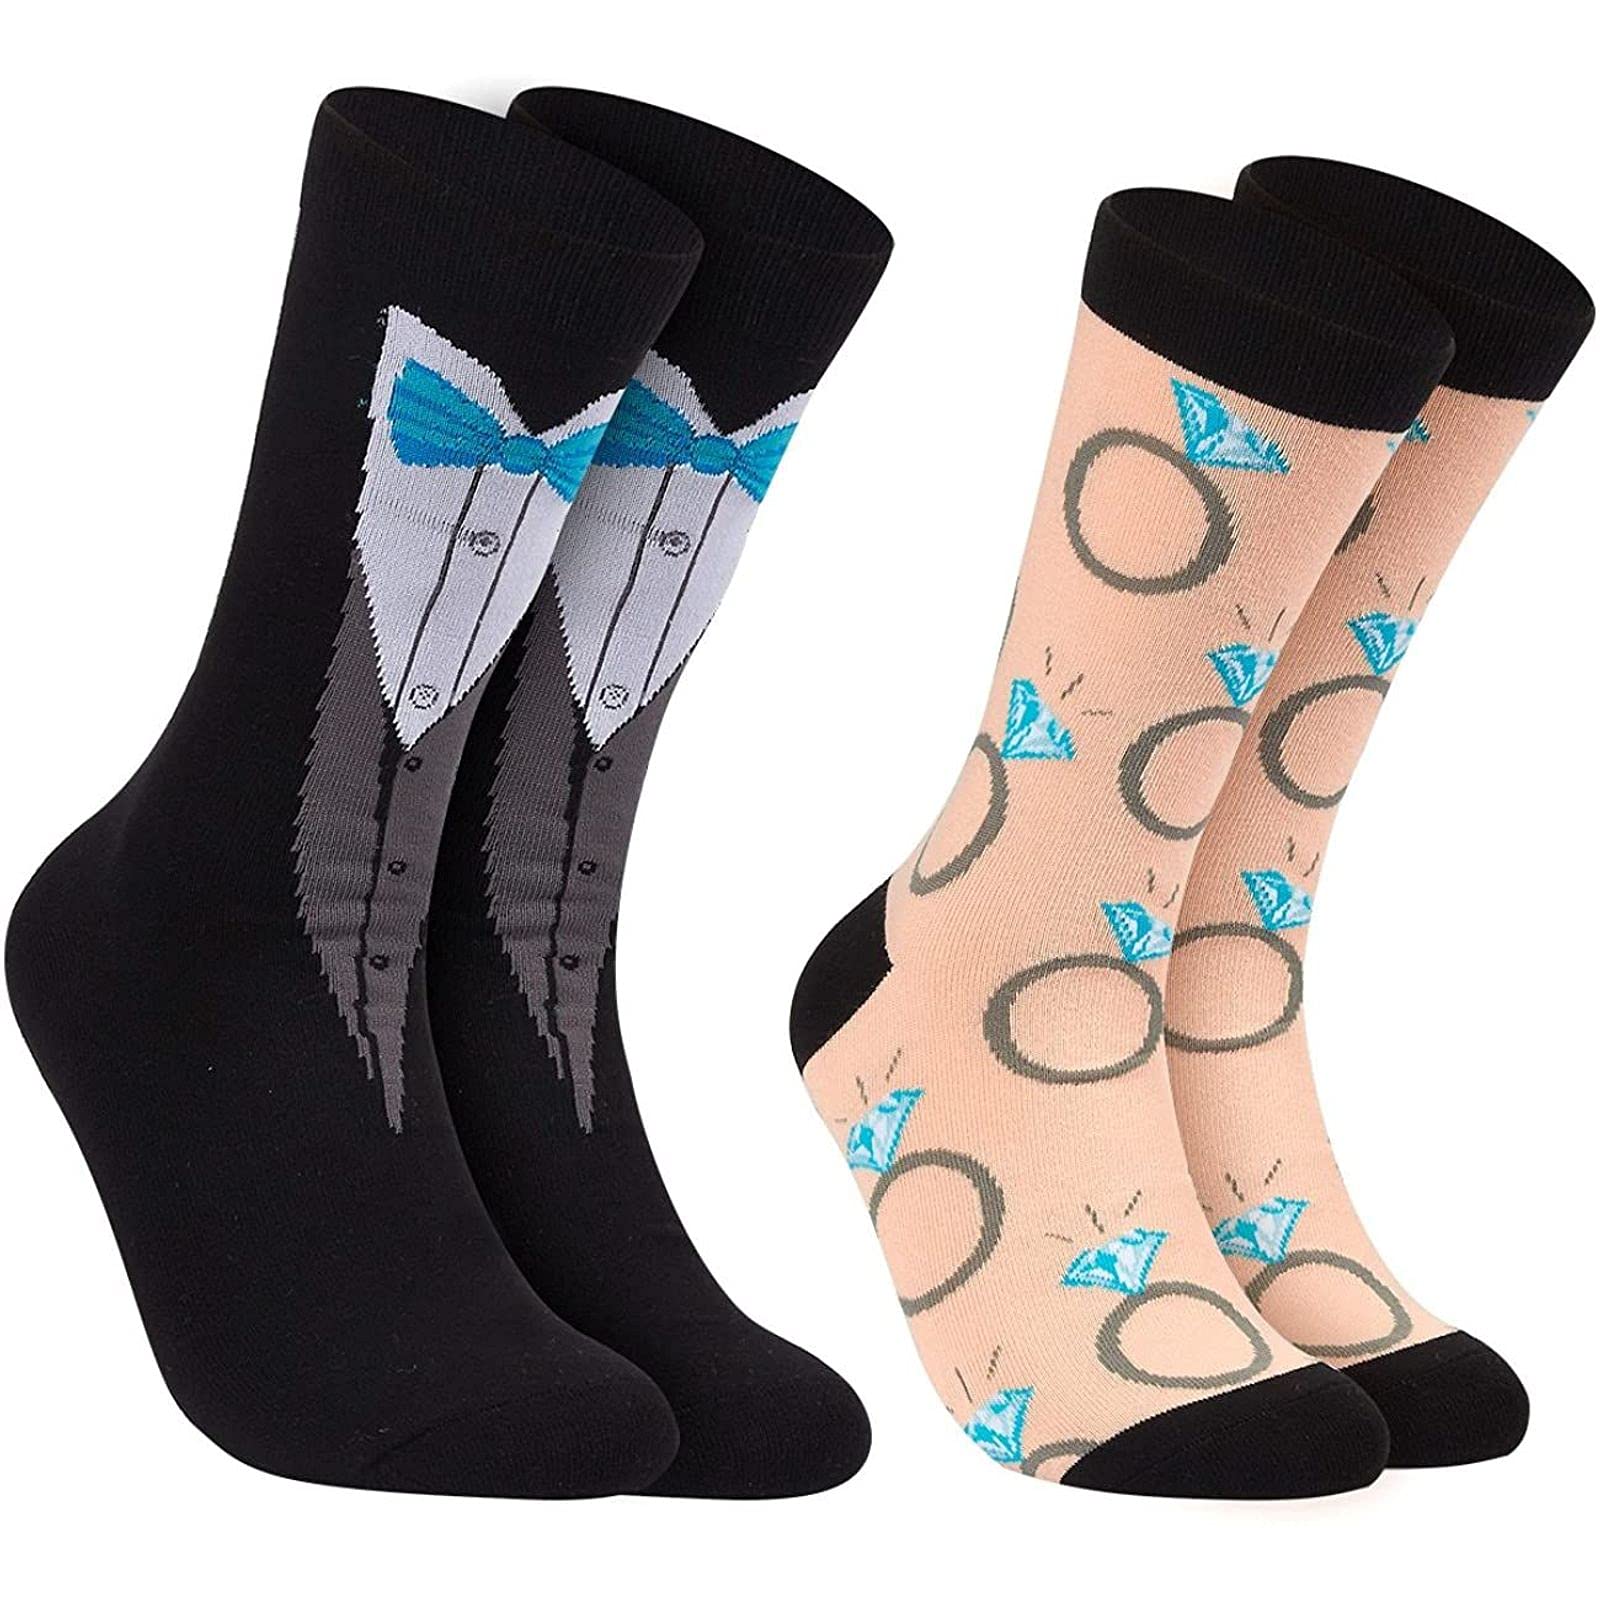 2 Pairs Bride and Groom Wedding Socks, Novelty Tuxedo and Diamond Ring Designs, One Size